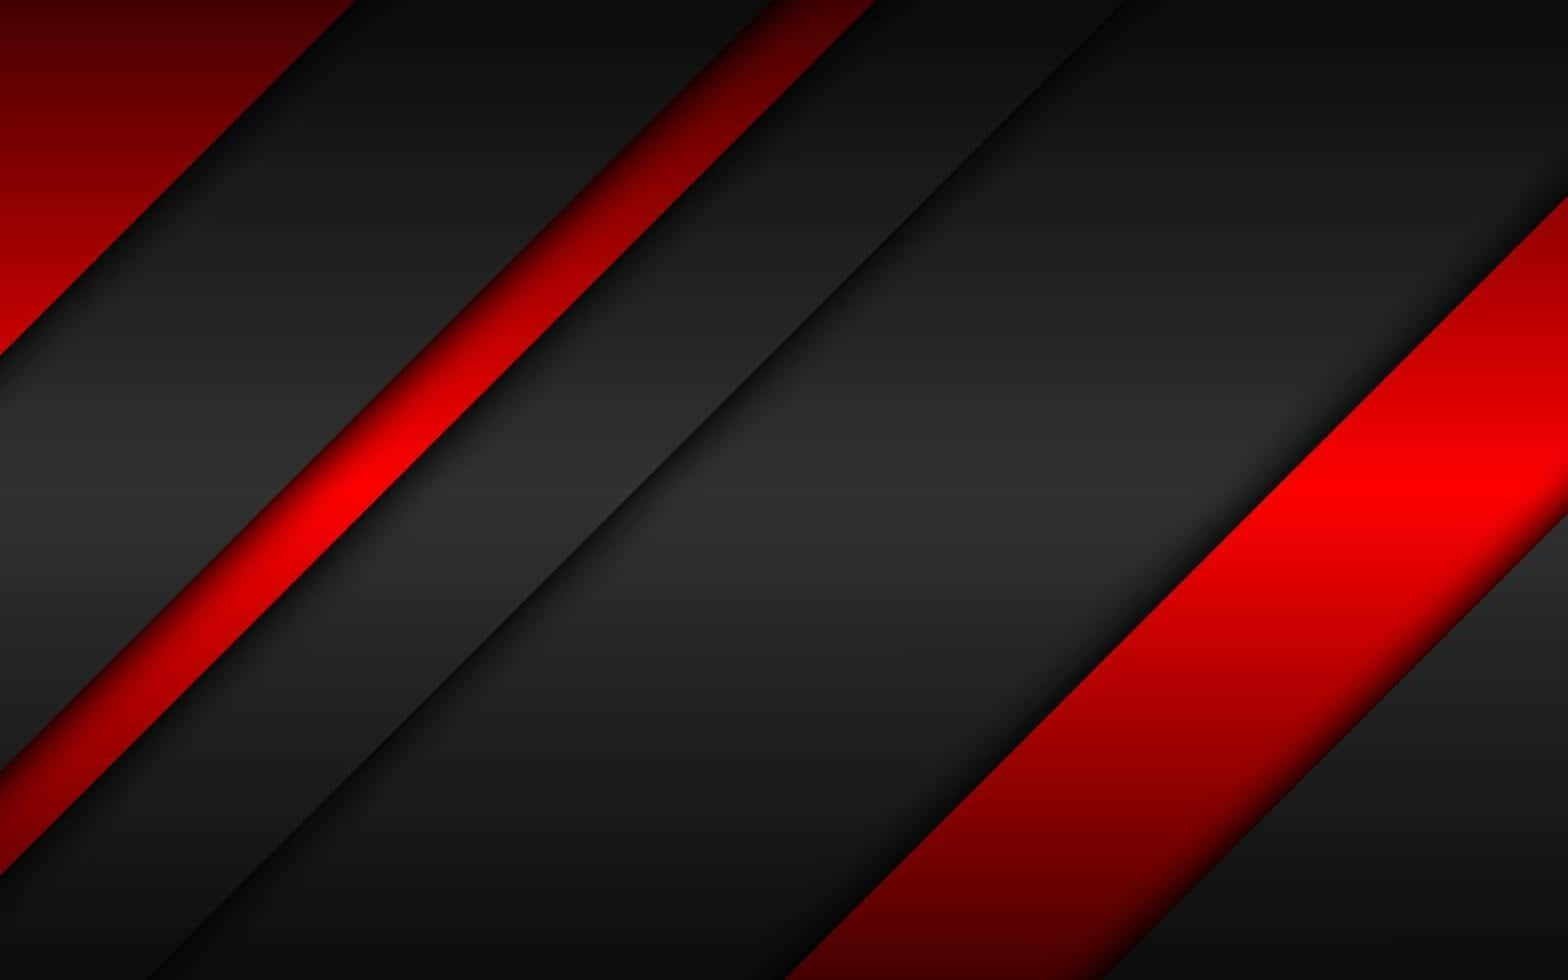 Follow The Red Line Wallpaper